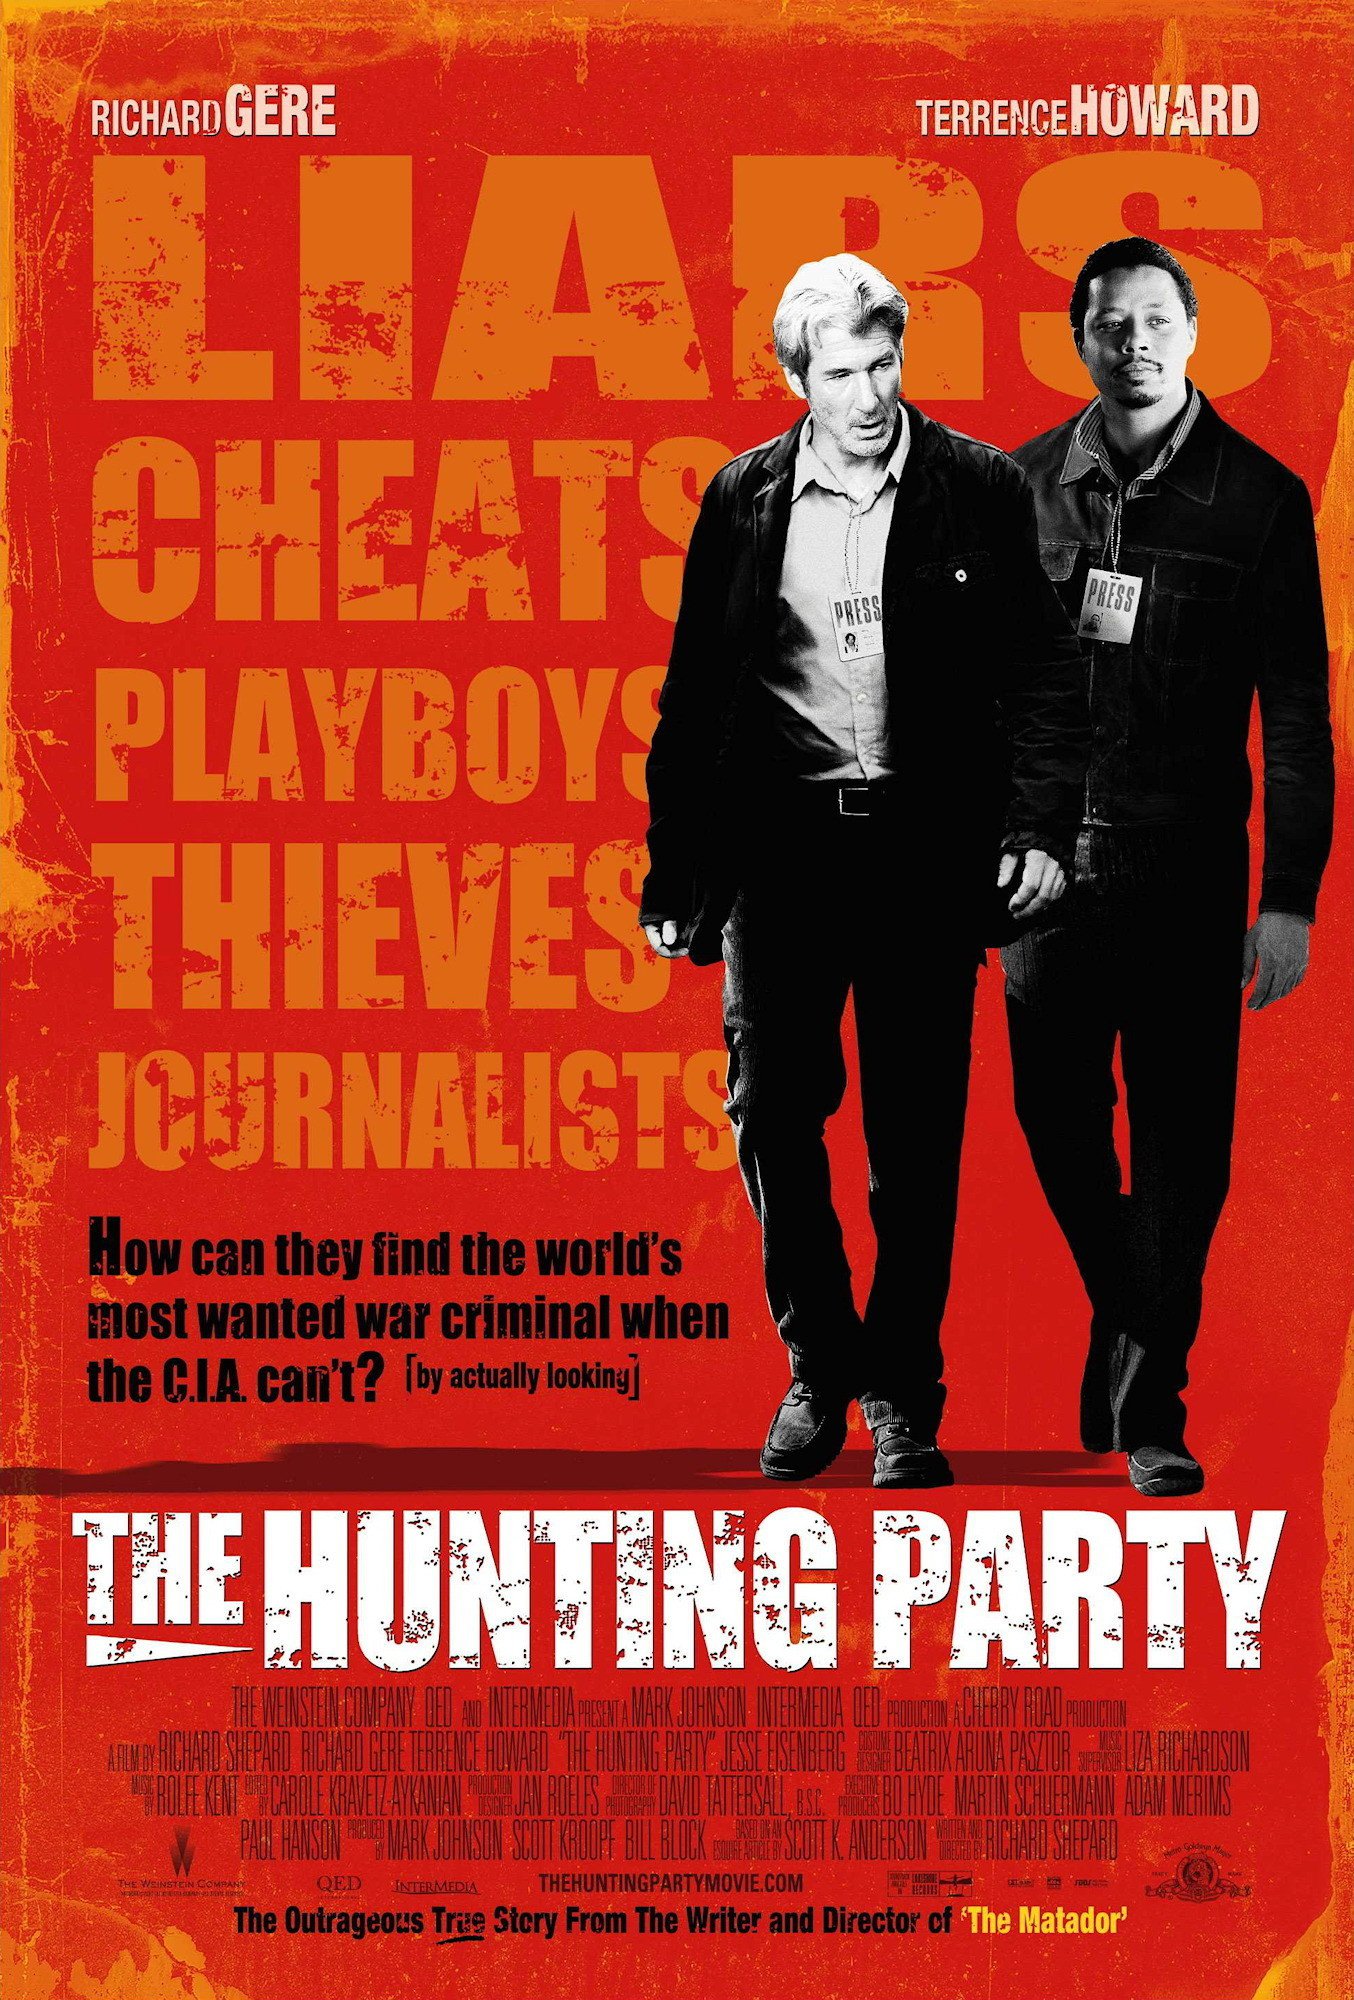 Poster for the movie "The Hunting Party"